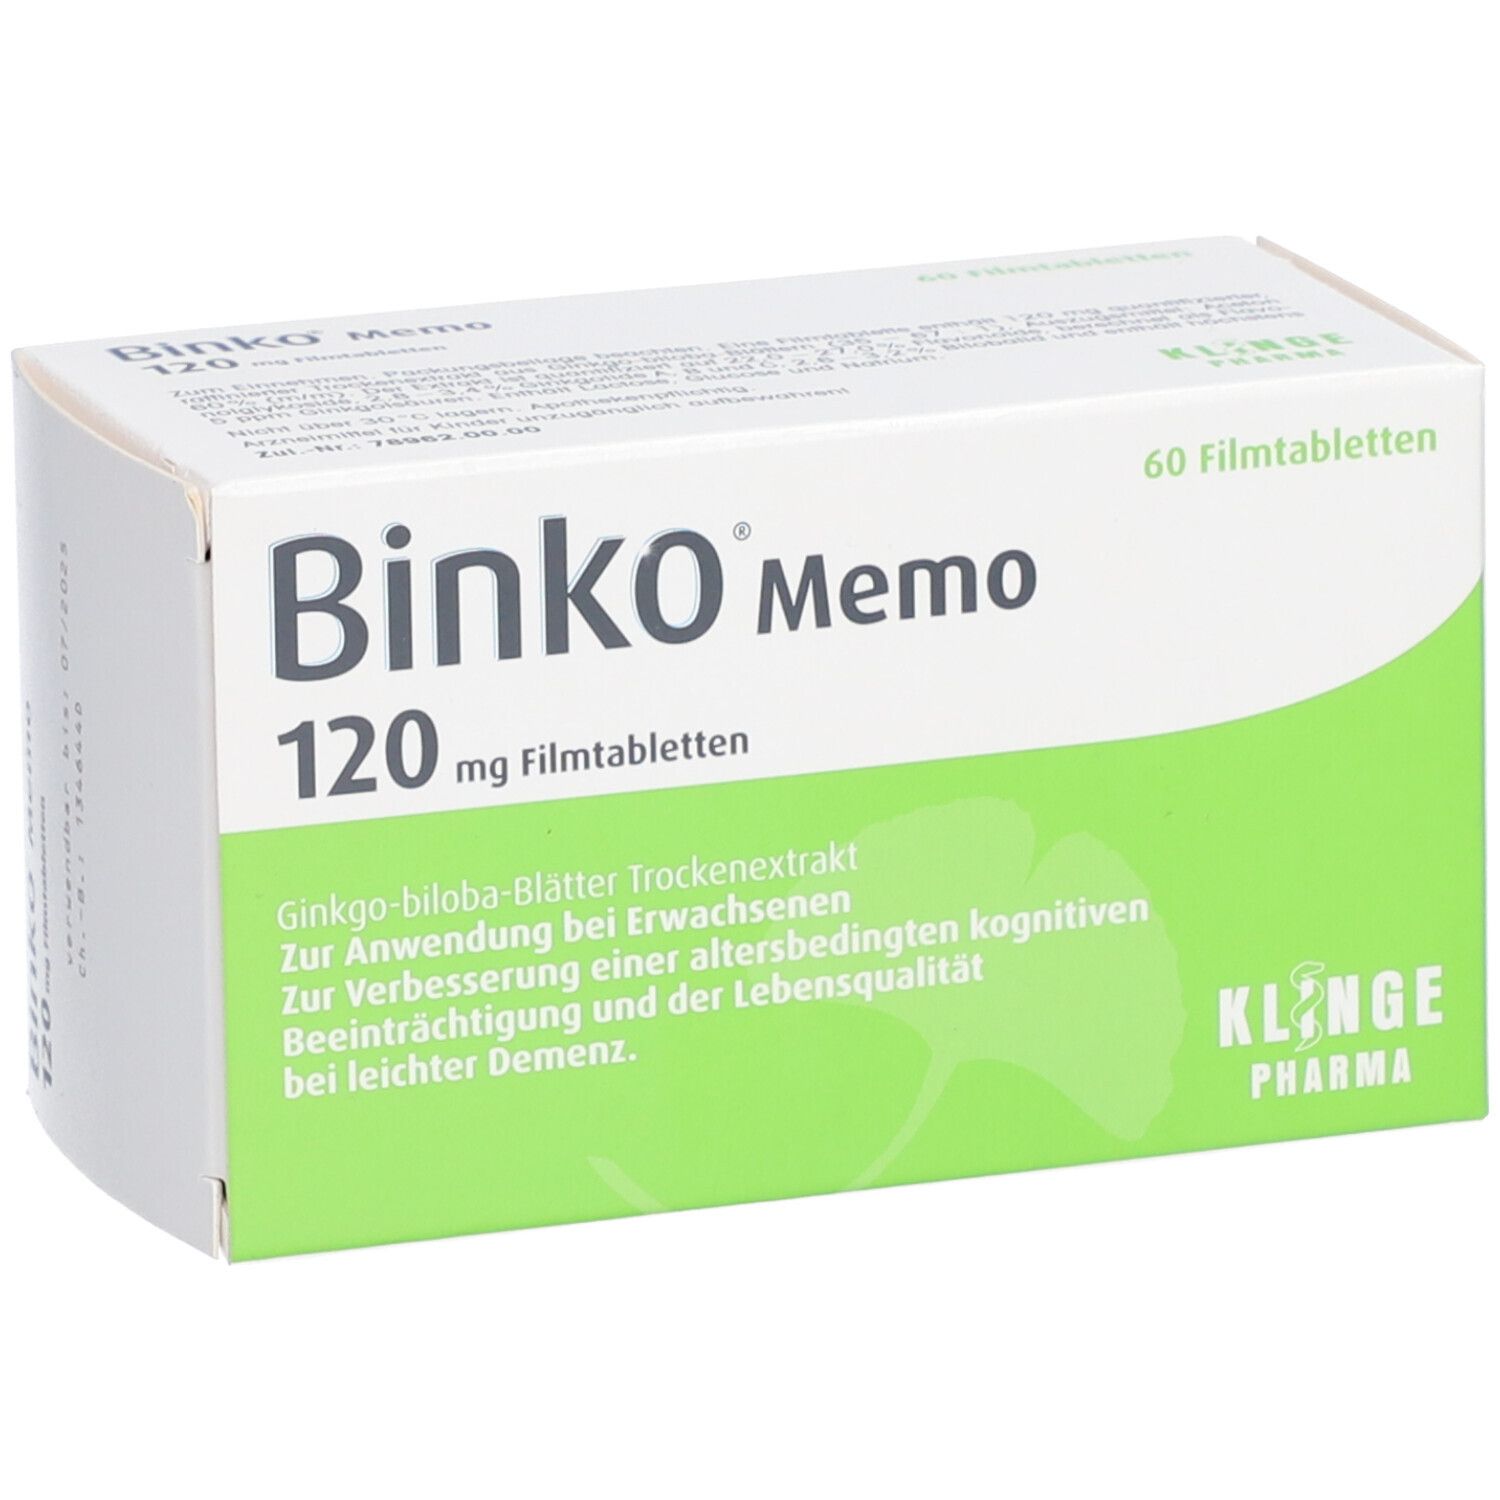 MEMO+ 120 Tablets, Products